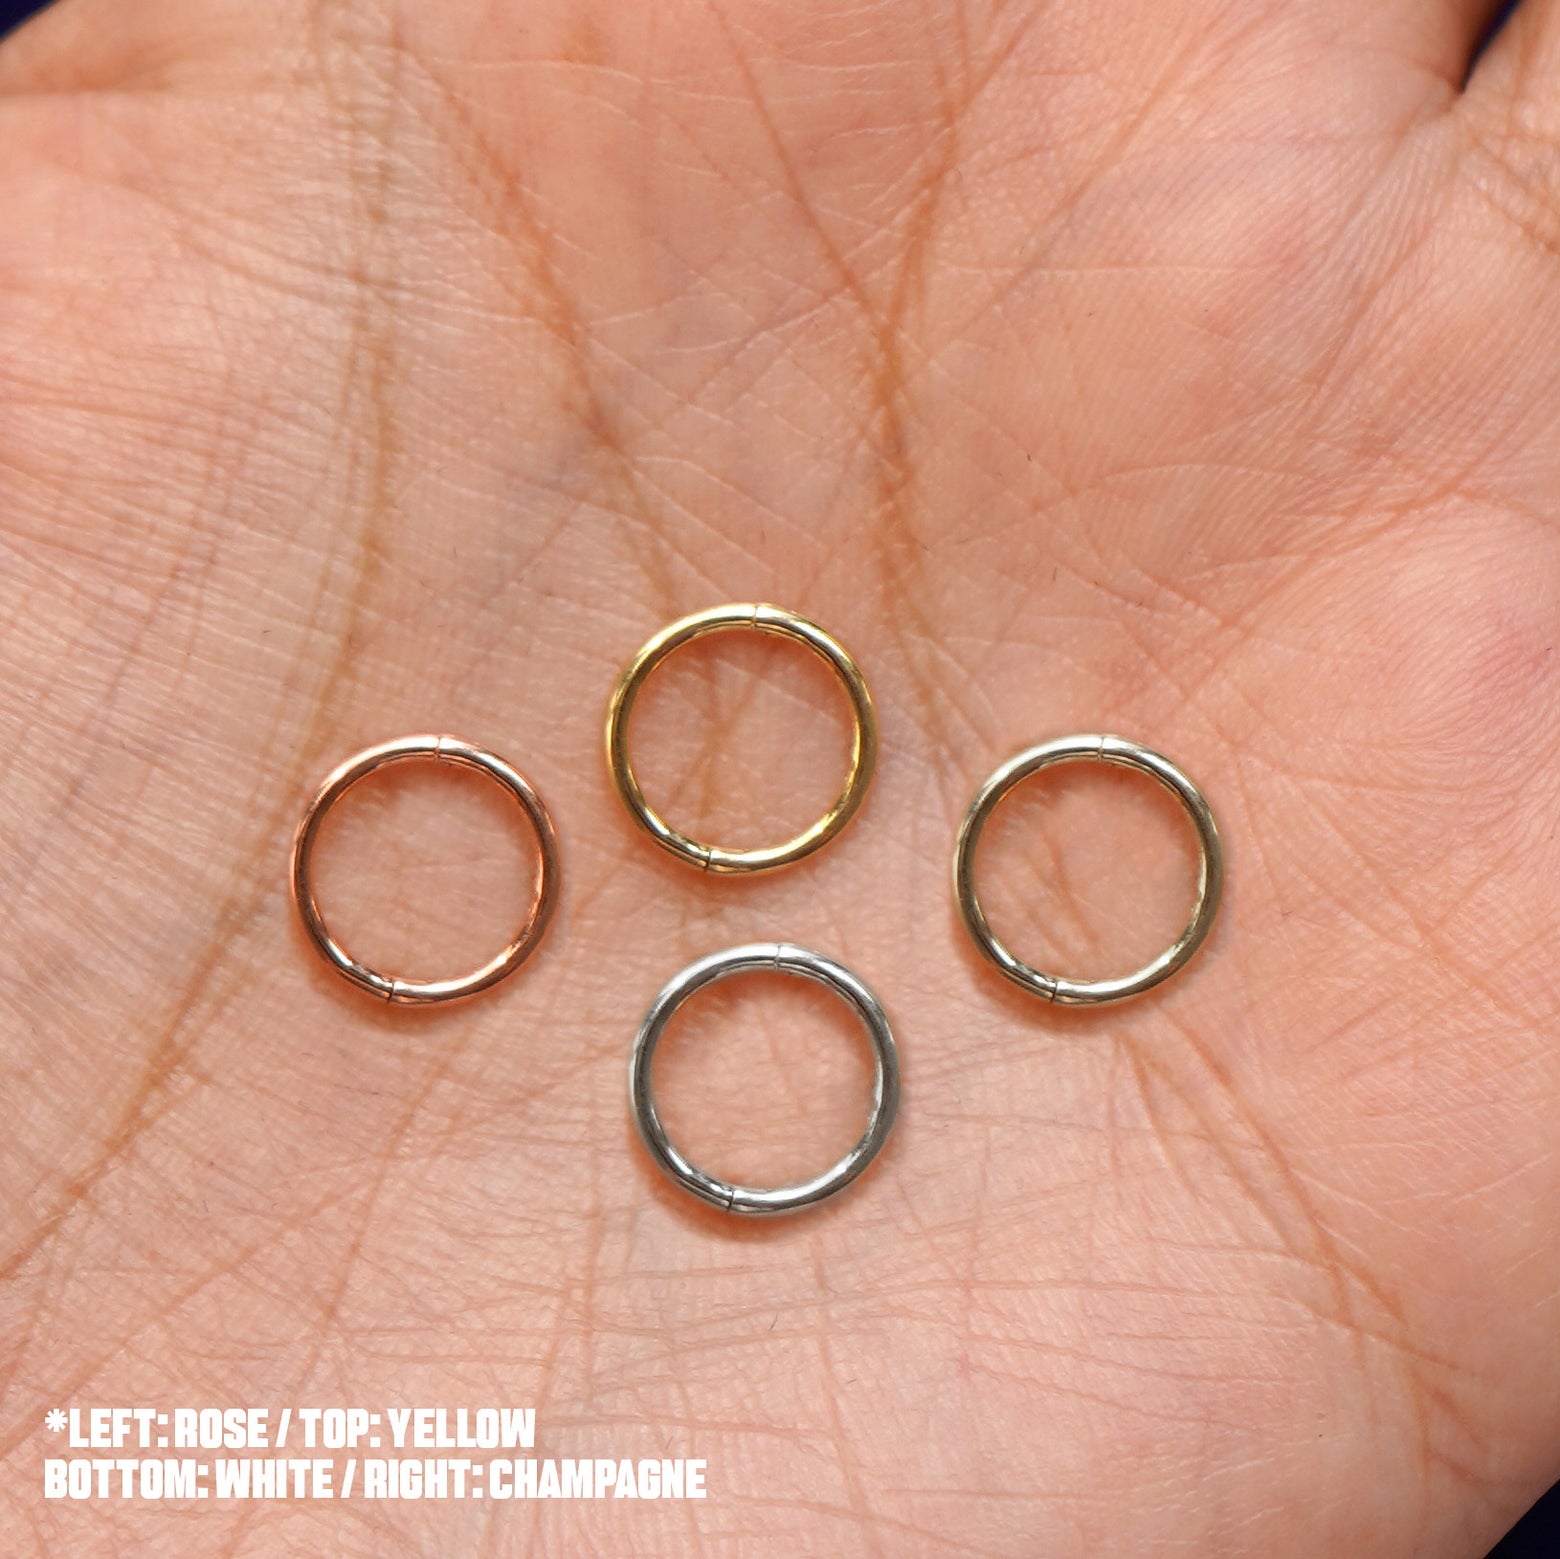 Four versions of the Small Seamless Huggie Hoop / Piercing shown in options of rose, yellow, champagne, and white gold